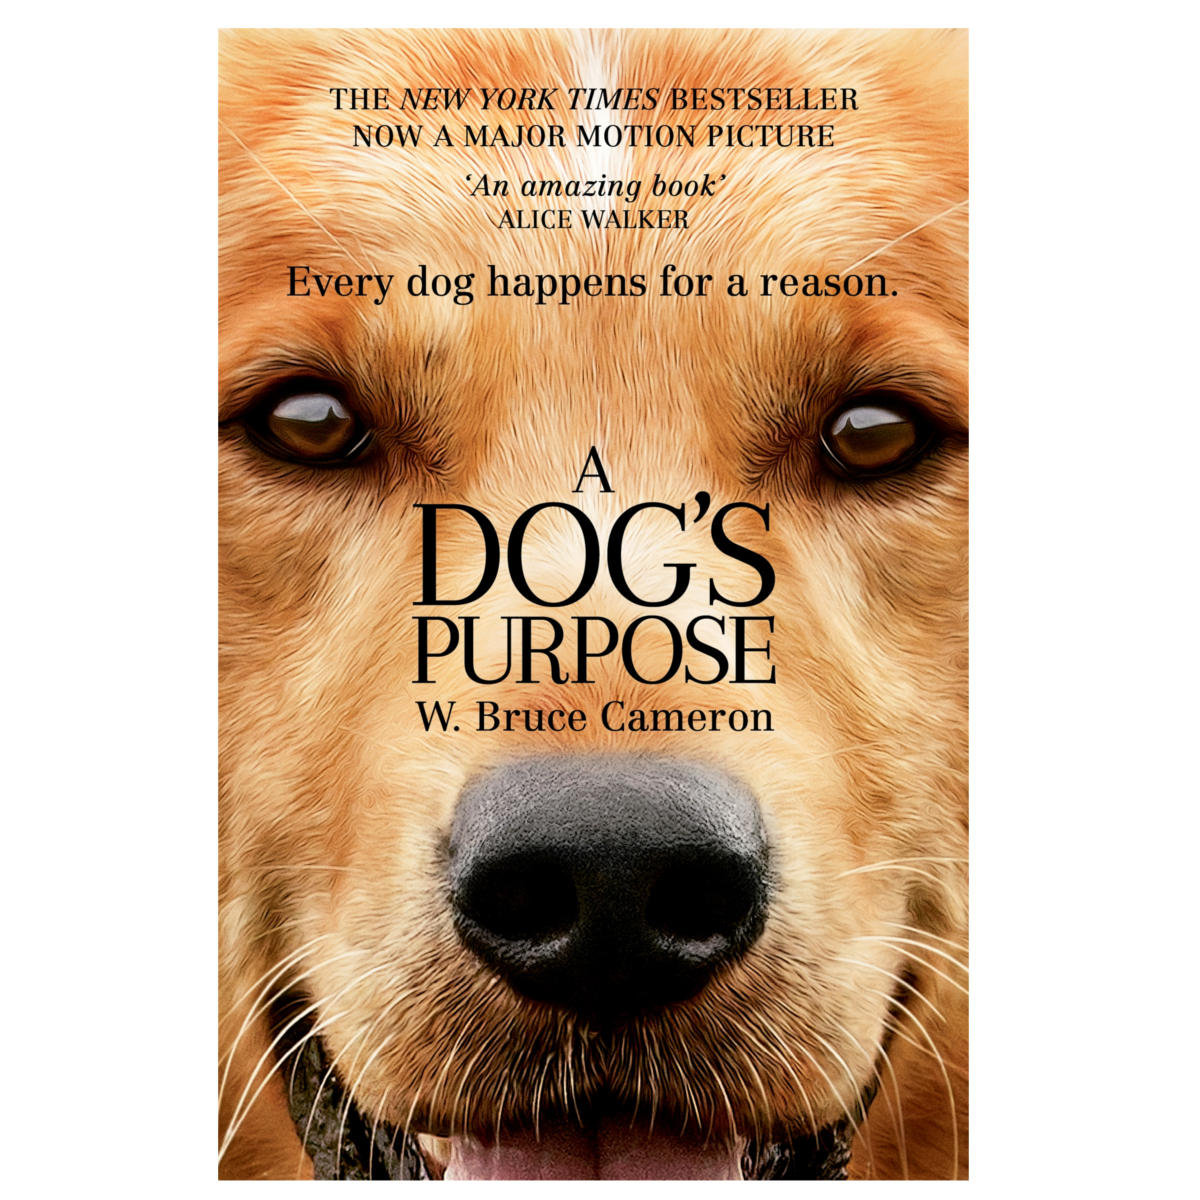 A Dog's Purpose by W. Bruce Cameron - Book